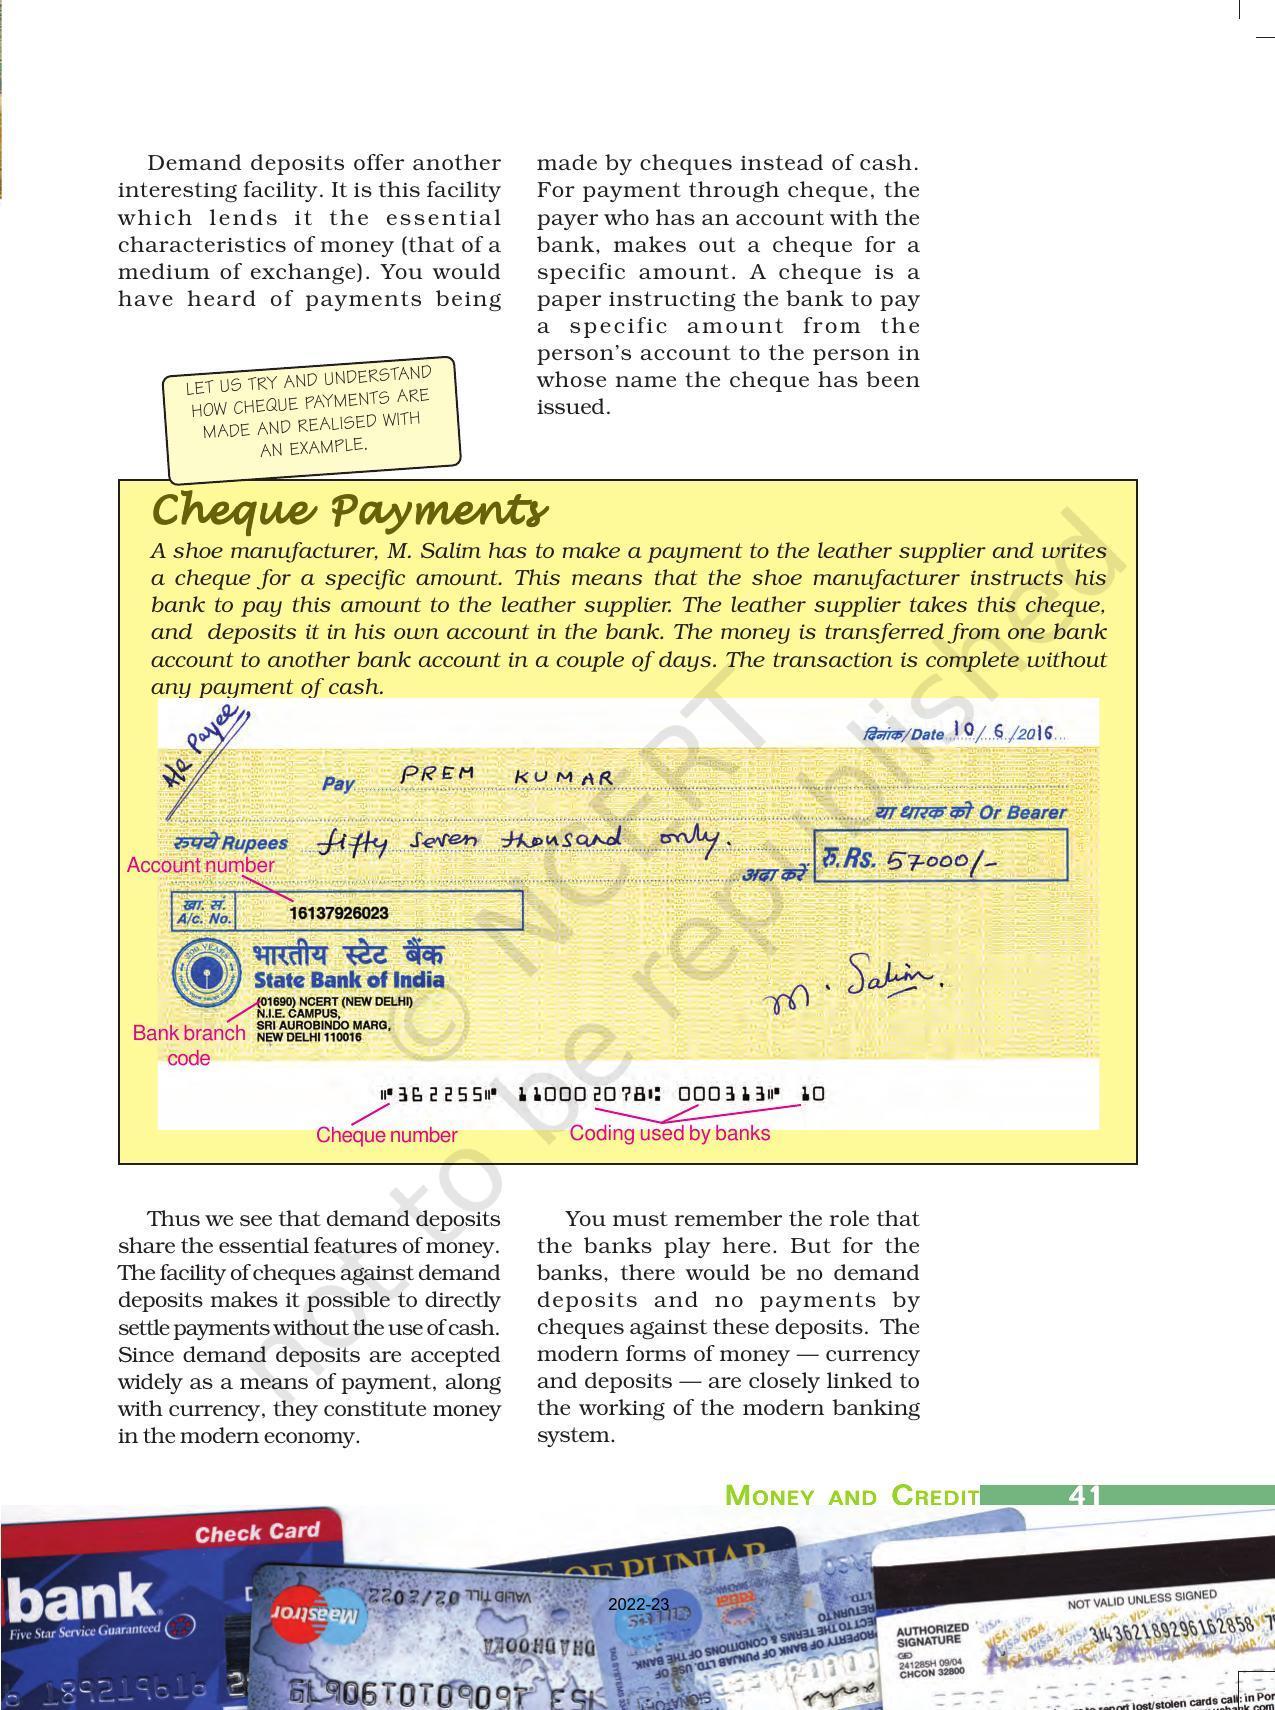 NCERT Book for Class 10 Economics Chapter 3 Money and Credit - Page 4